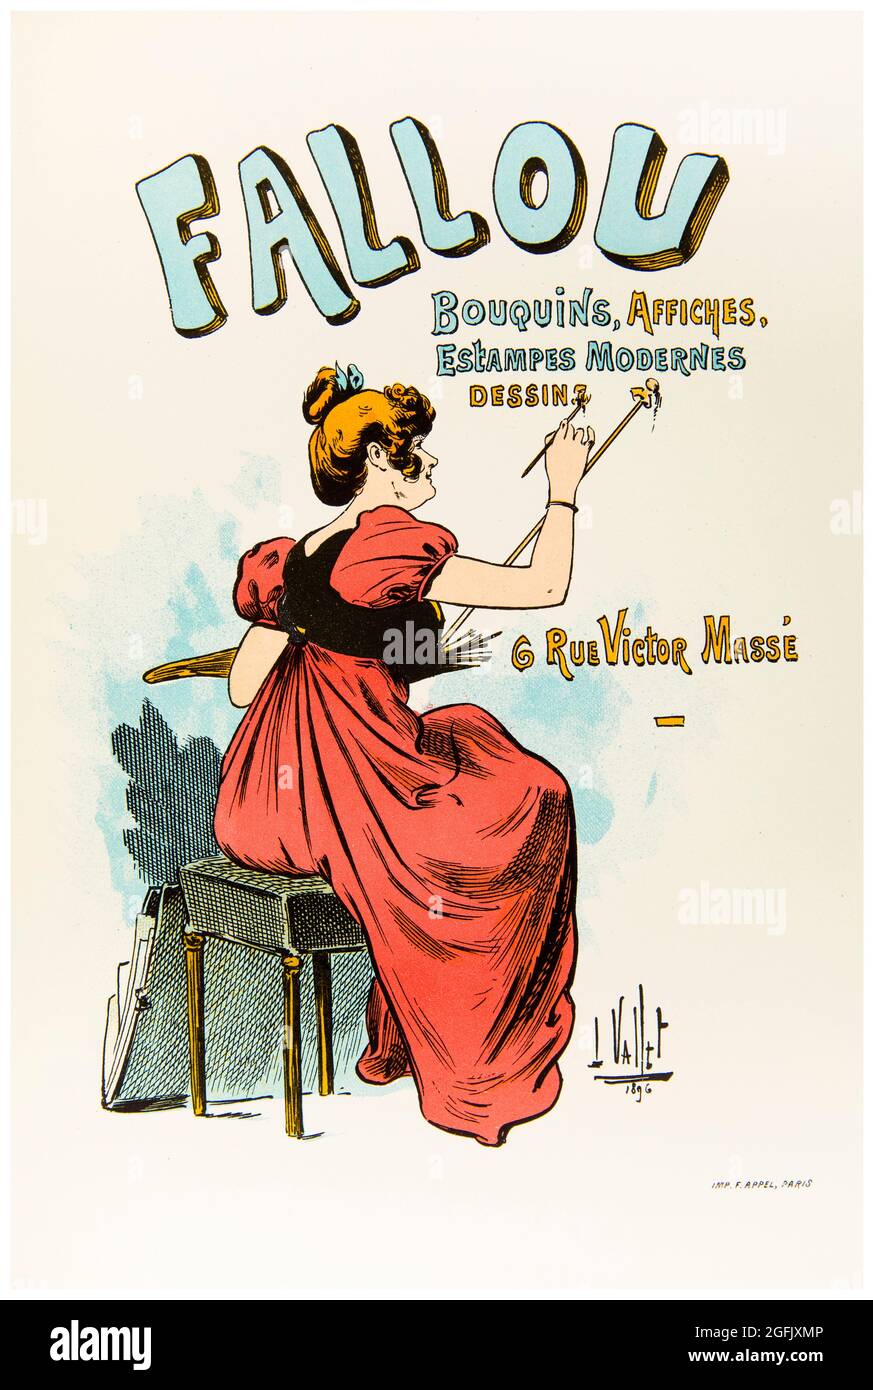 Vintage 19th Century Address card of the publishing house and art bookstore, Fallou, 6 rue Victor Masse Paris France, lithographic print by Louis Vallet, 1896-1897 Stock Photo